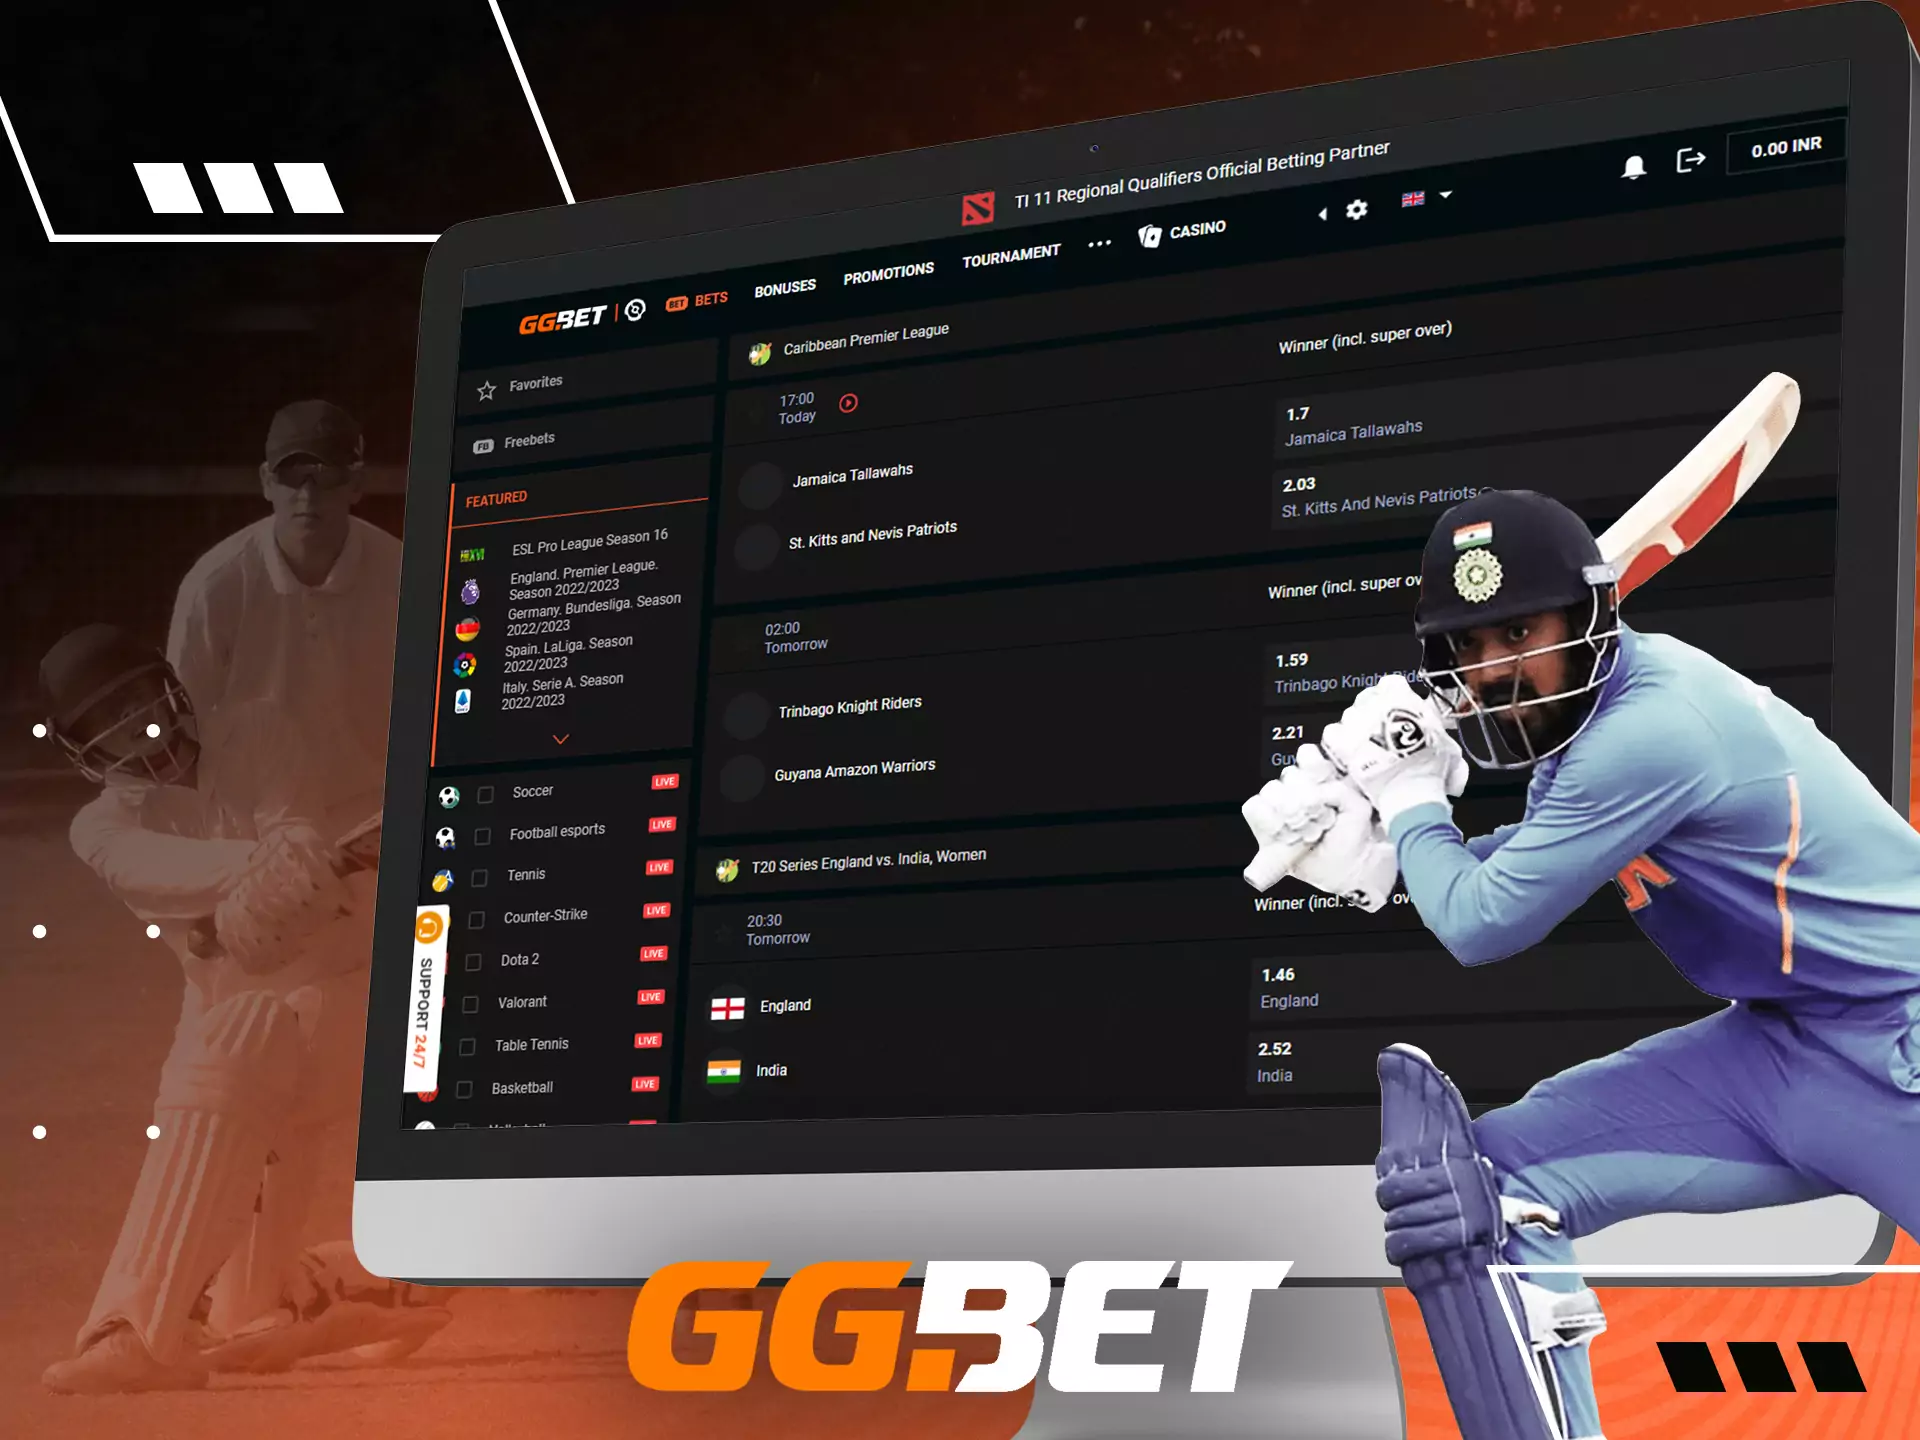 Cricket is the most popular sports discipline among GGBet players from India.